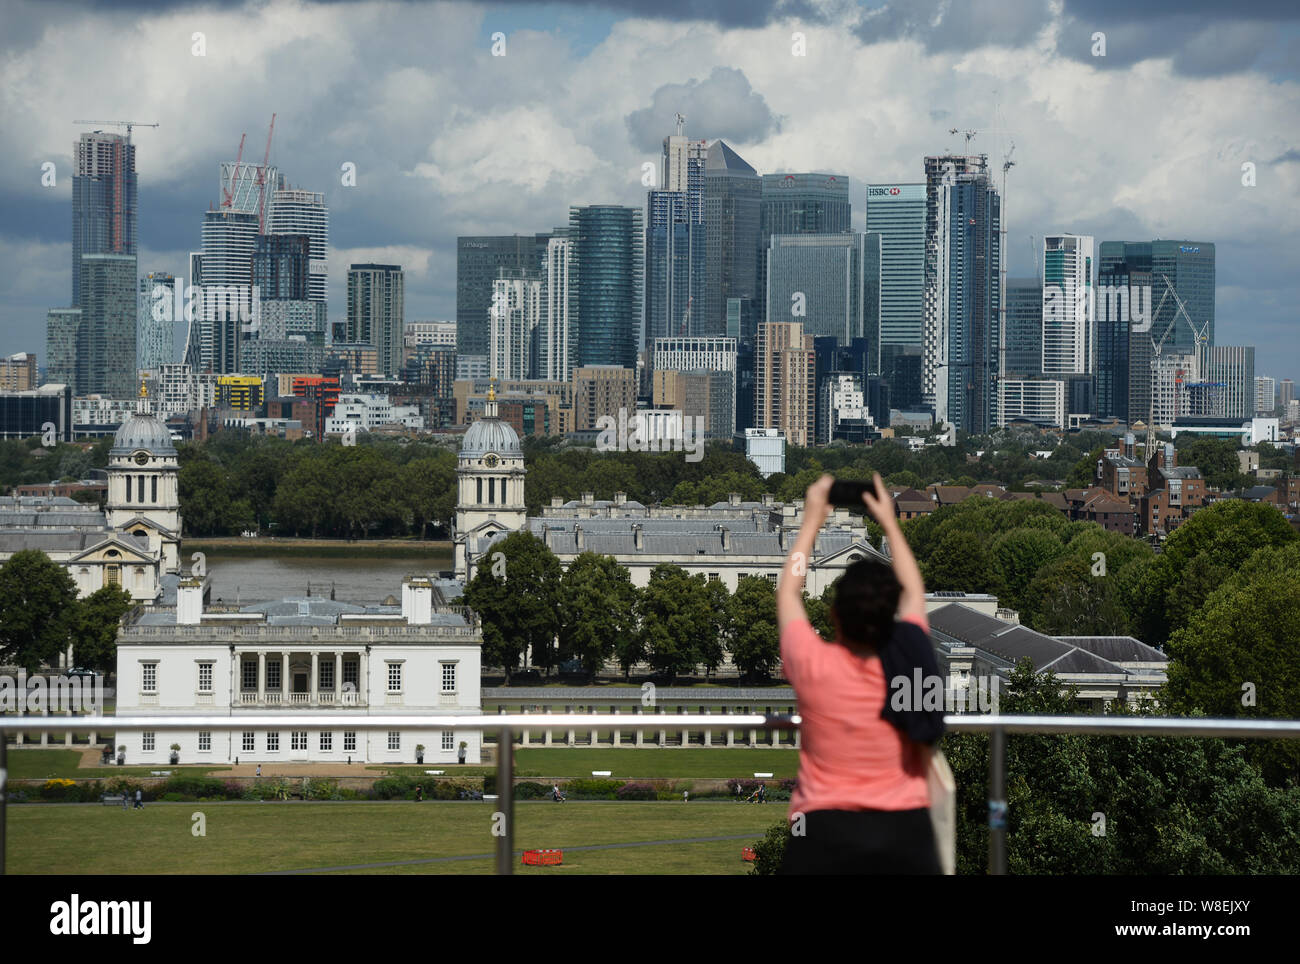 A woman takes a photograph of the Old Royal Naval College and Canary Wharf, from the Royal Observatory in Greenwich, London. Warnings for rain and wind came into force across nearly all of the UK today. Stock Photo